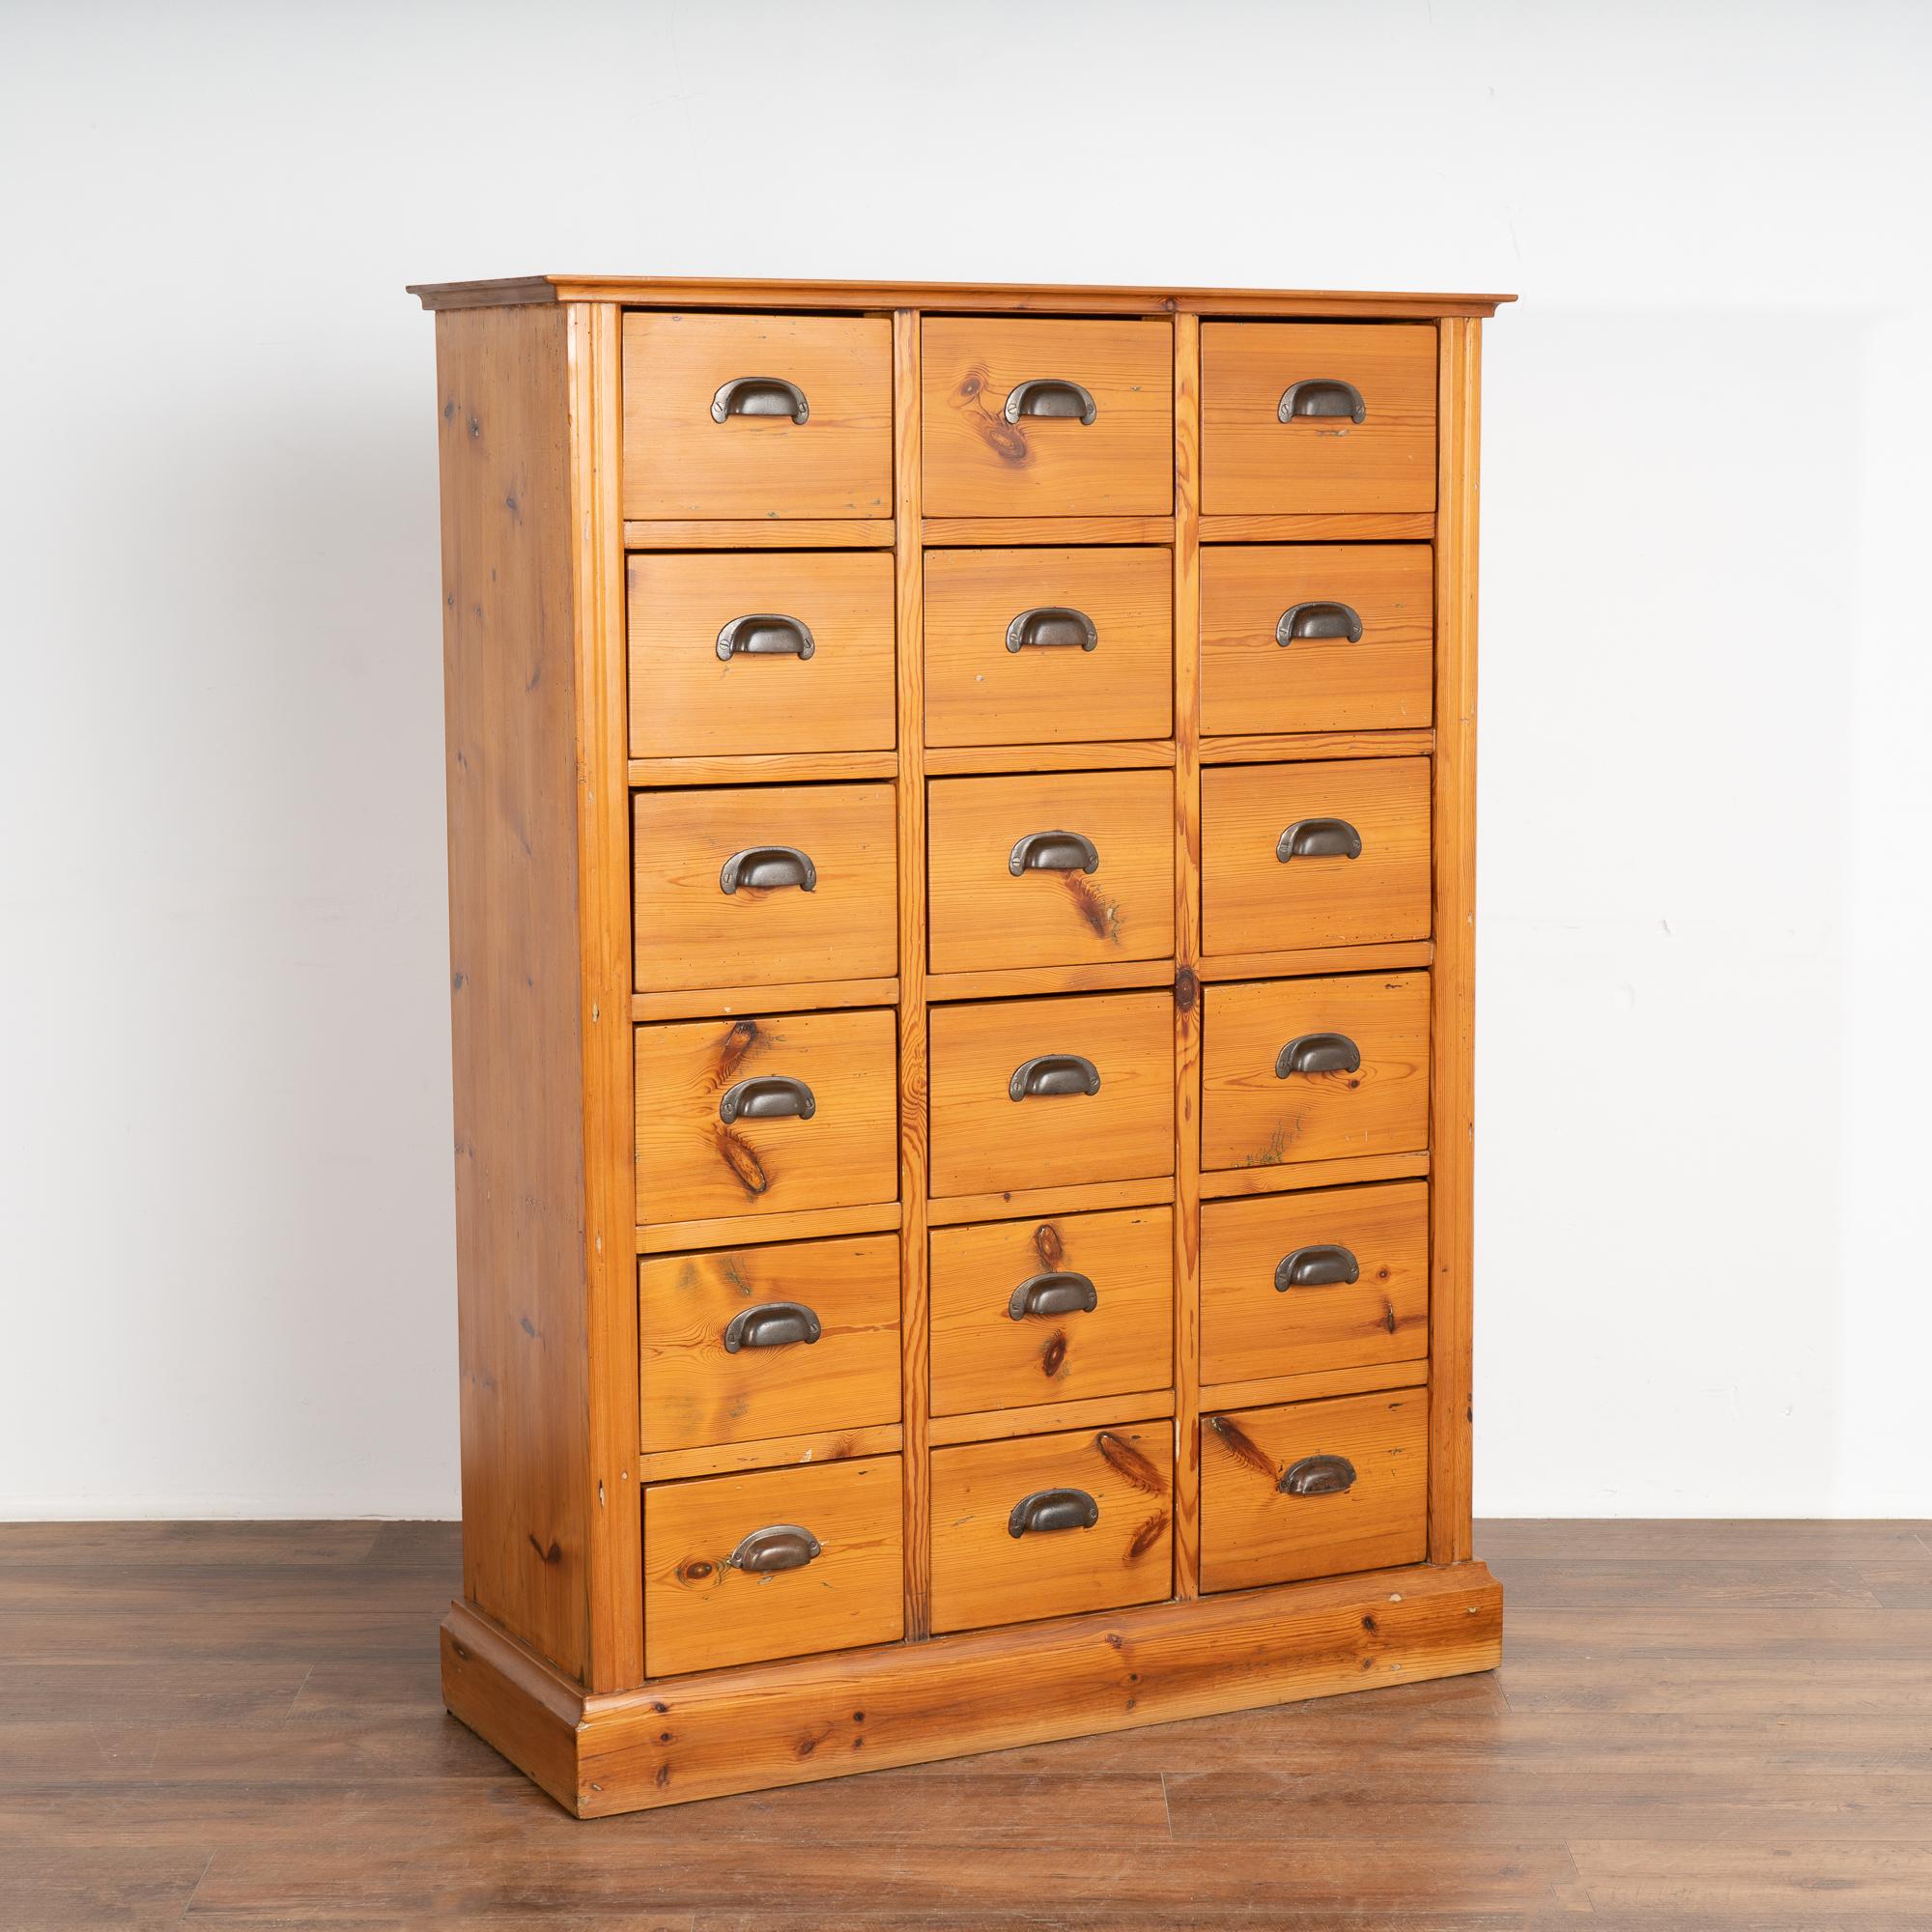 This tall pine apothecary chest of 18 drawers likely served in a Danish country store during the mid to late 1800's. 
The 18 drawers with metal pull handles will serve well to organize and store items for a craft room or workshop.
Restored with a